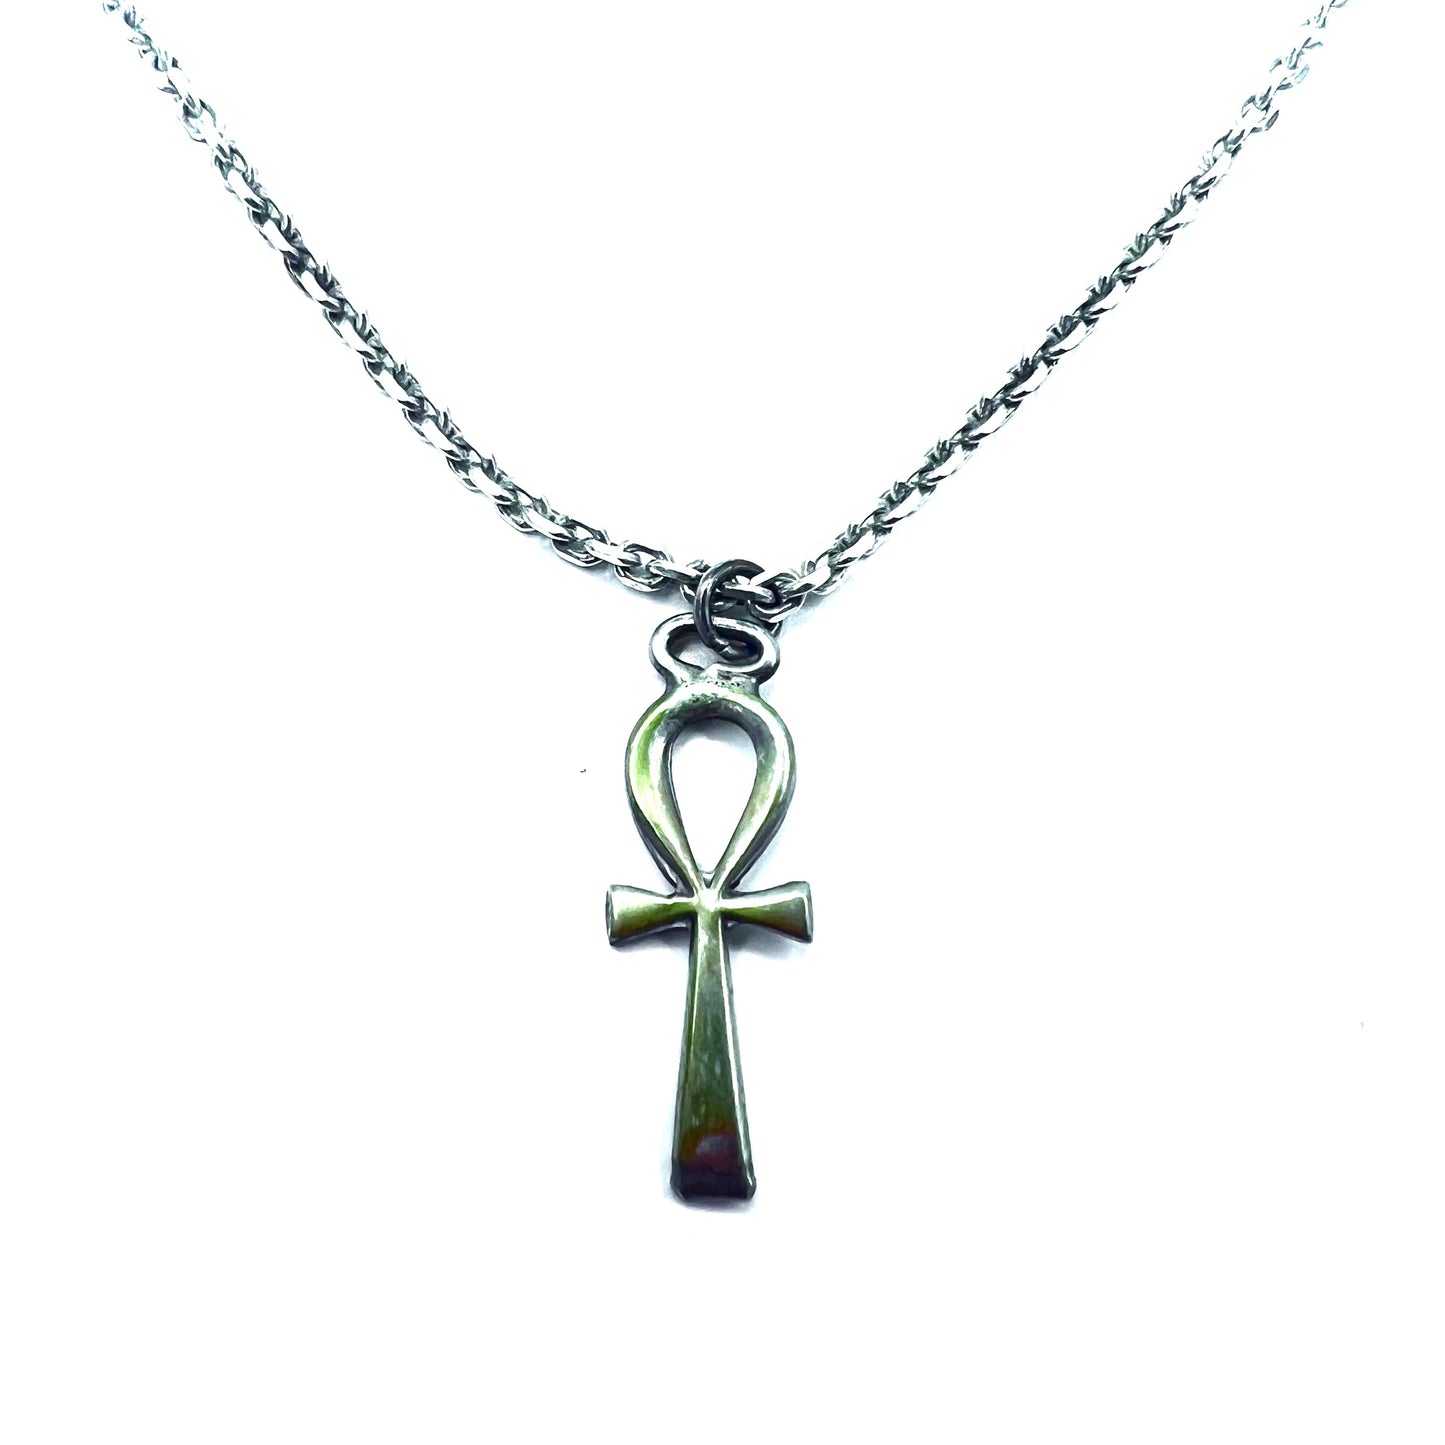 Vintage Ankh Cross Silver Necklace ヴィンテージ アンククロス エジプト十字 シルバーネックレス  ITALY SILVER 925 あずきチェーン